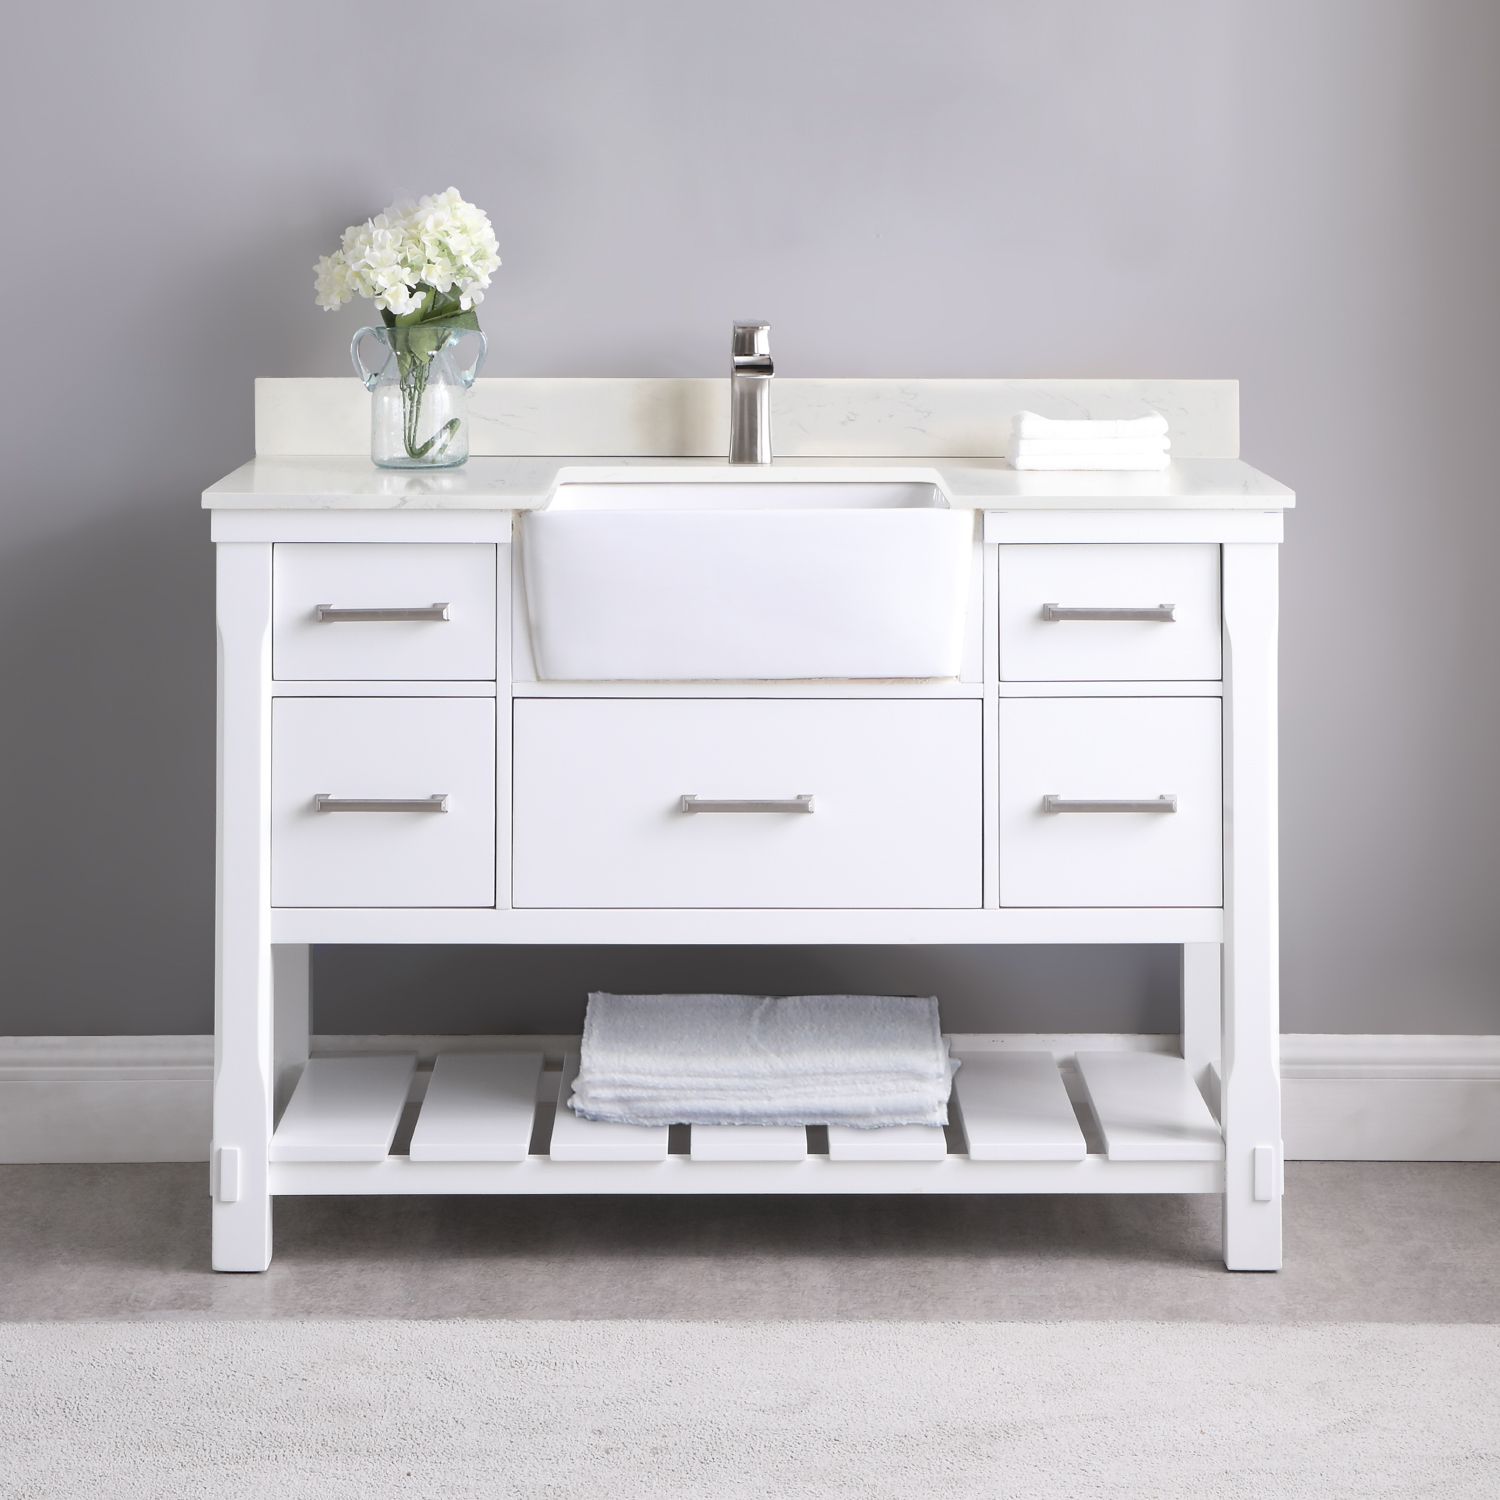 Issac Edwards Collection 48" Single Bathroom Vanity Set in White and Composite Carrara White Stone Top with White Farmhouse Basin without Mirror